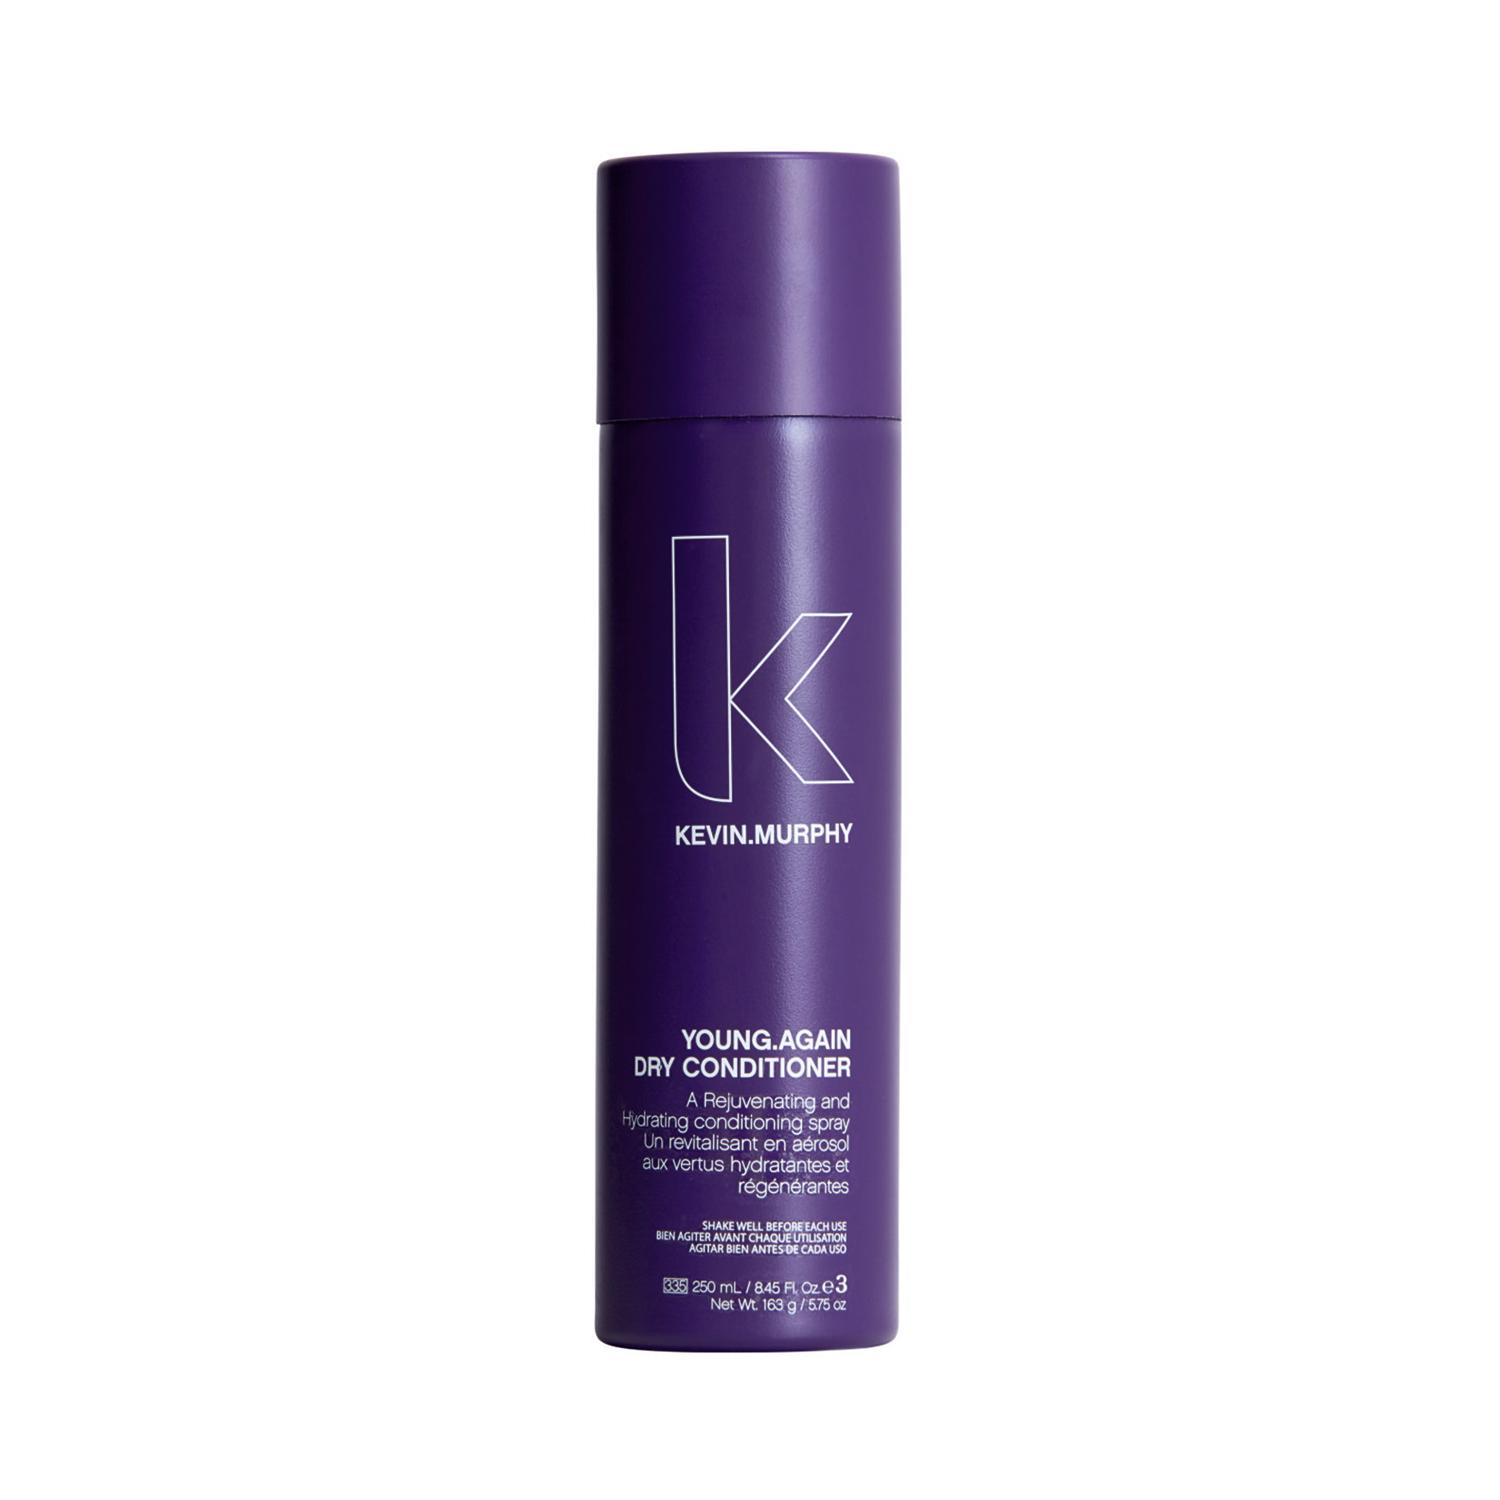 Kevin Murphy | Kevin Murphy Young Again Dry Conditioner (250ml)